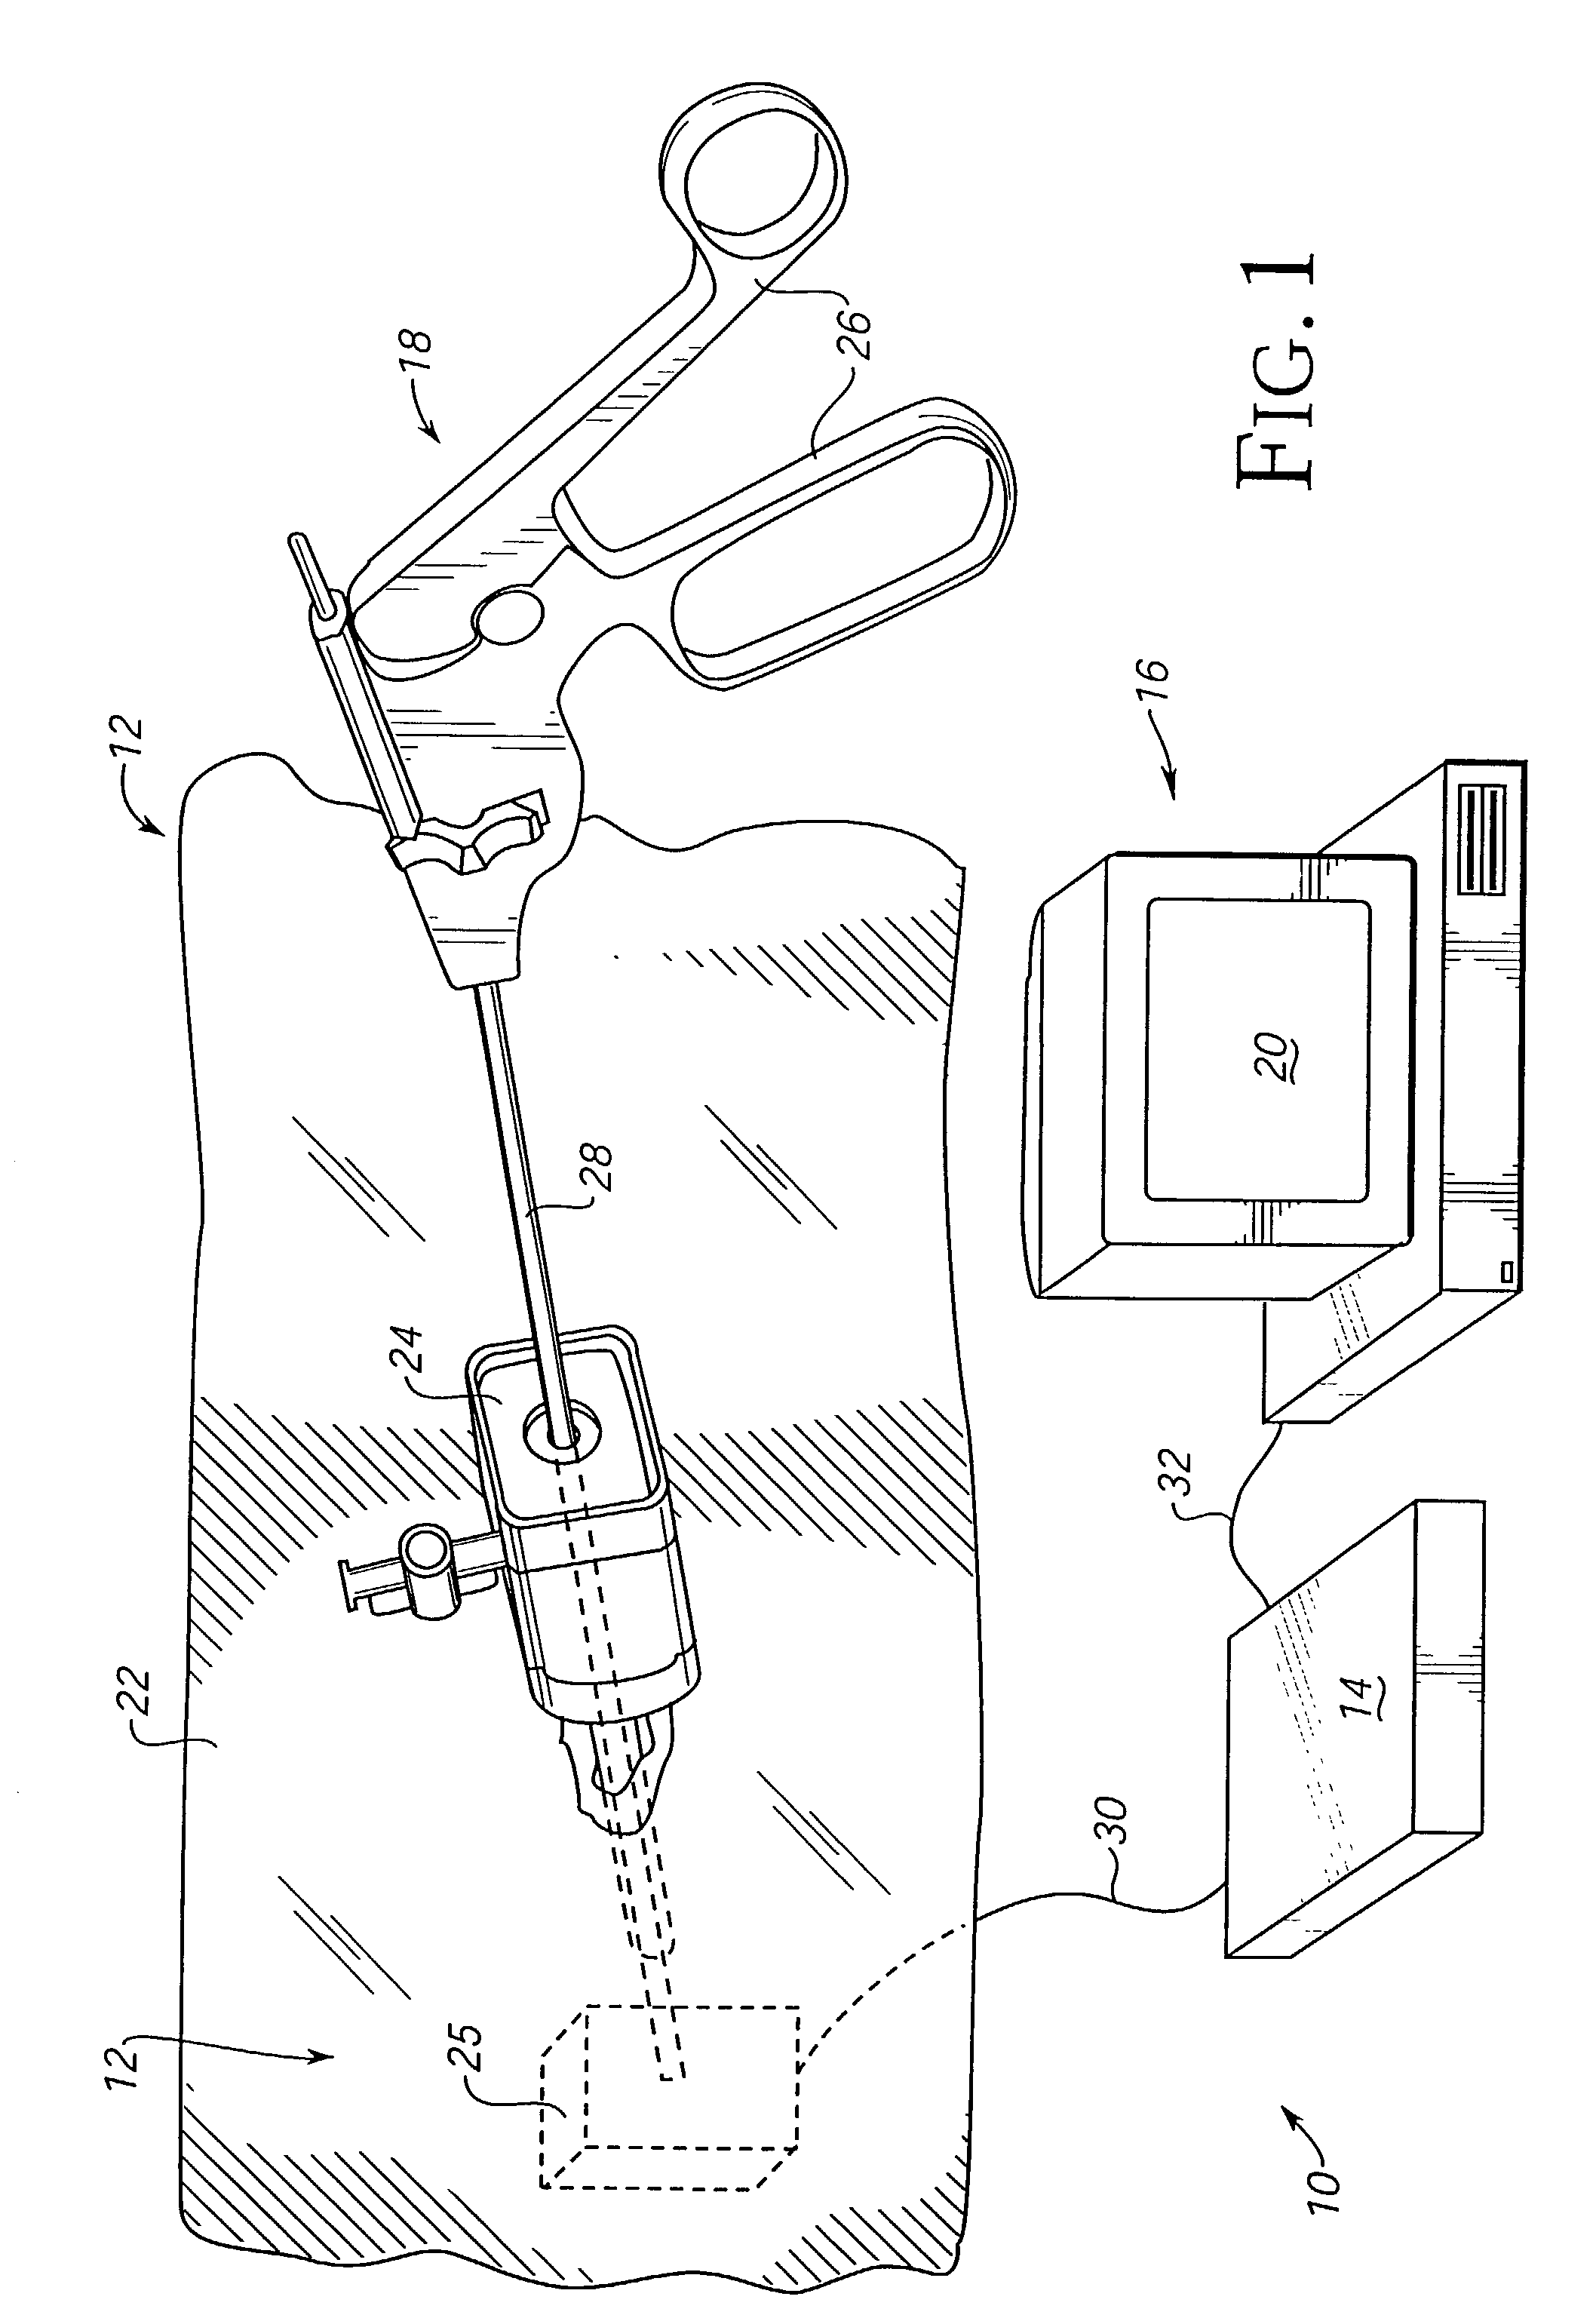 Interface apparatus with cable-driven force feedback and four grounded actuators